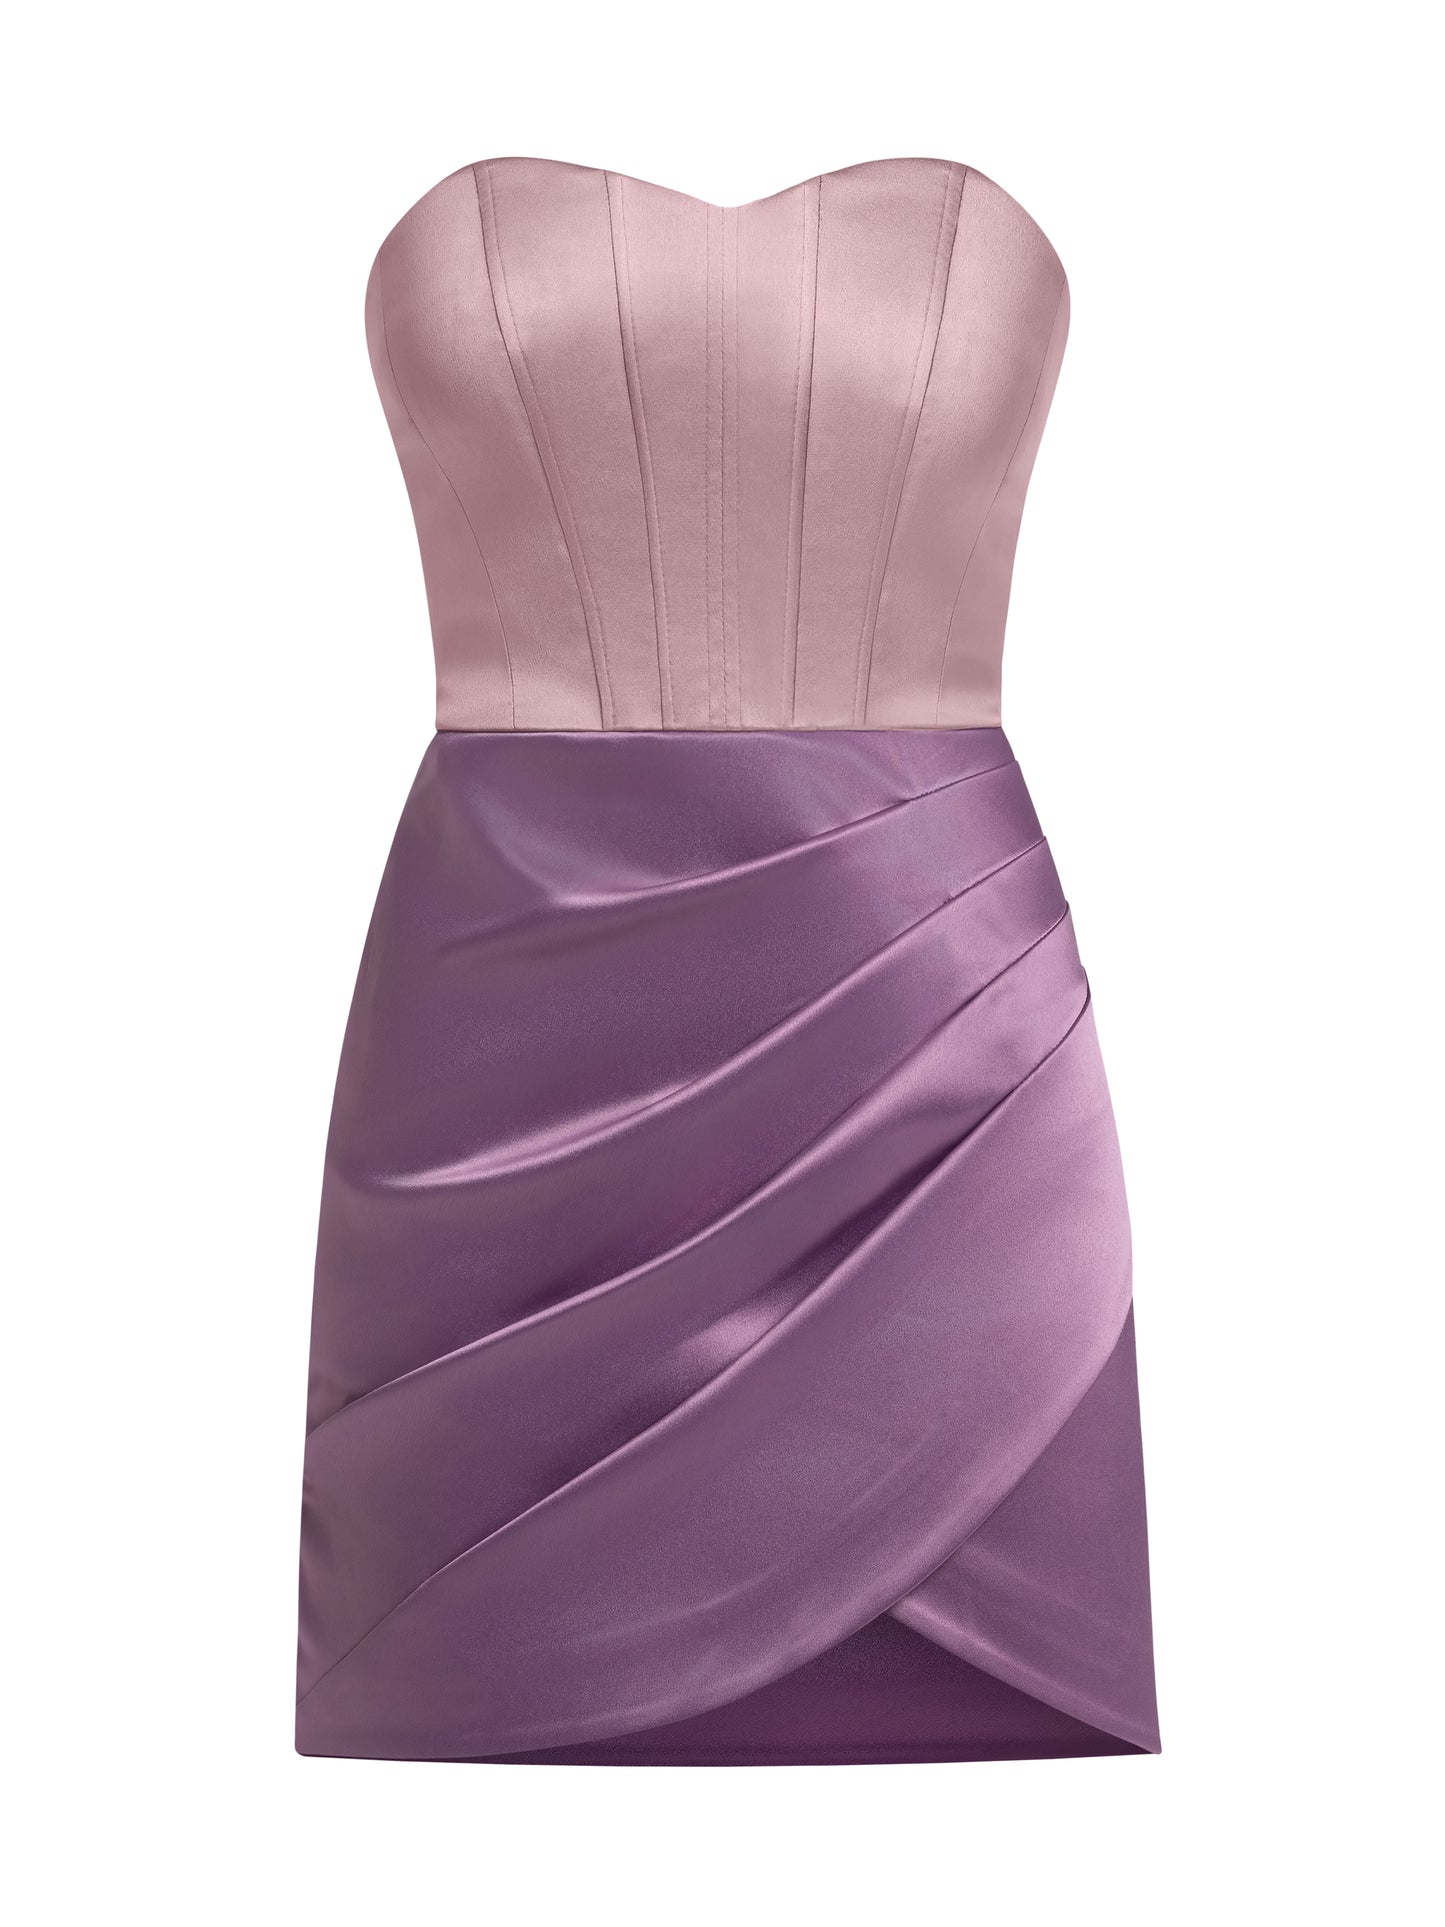 A Touch of Glamour Mini Dress - Pink & Purple